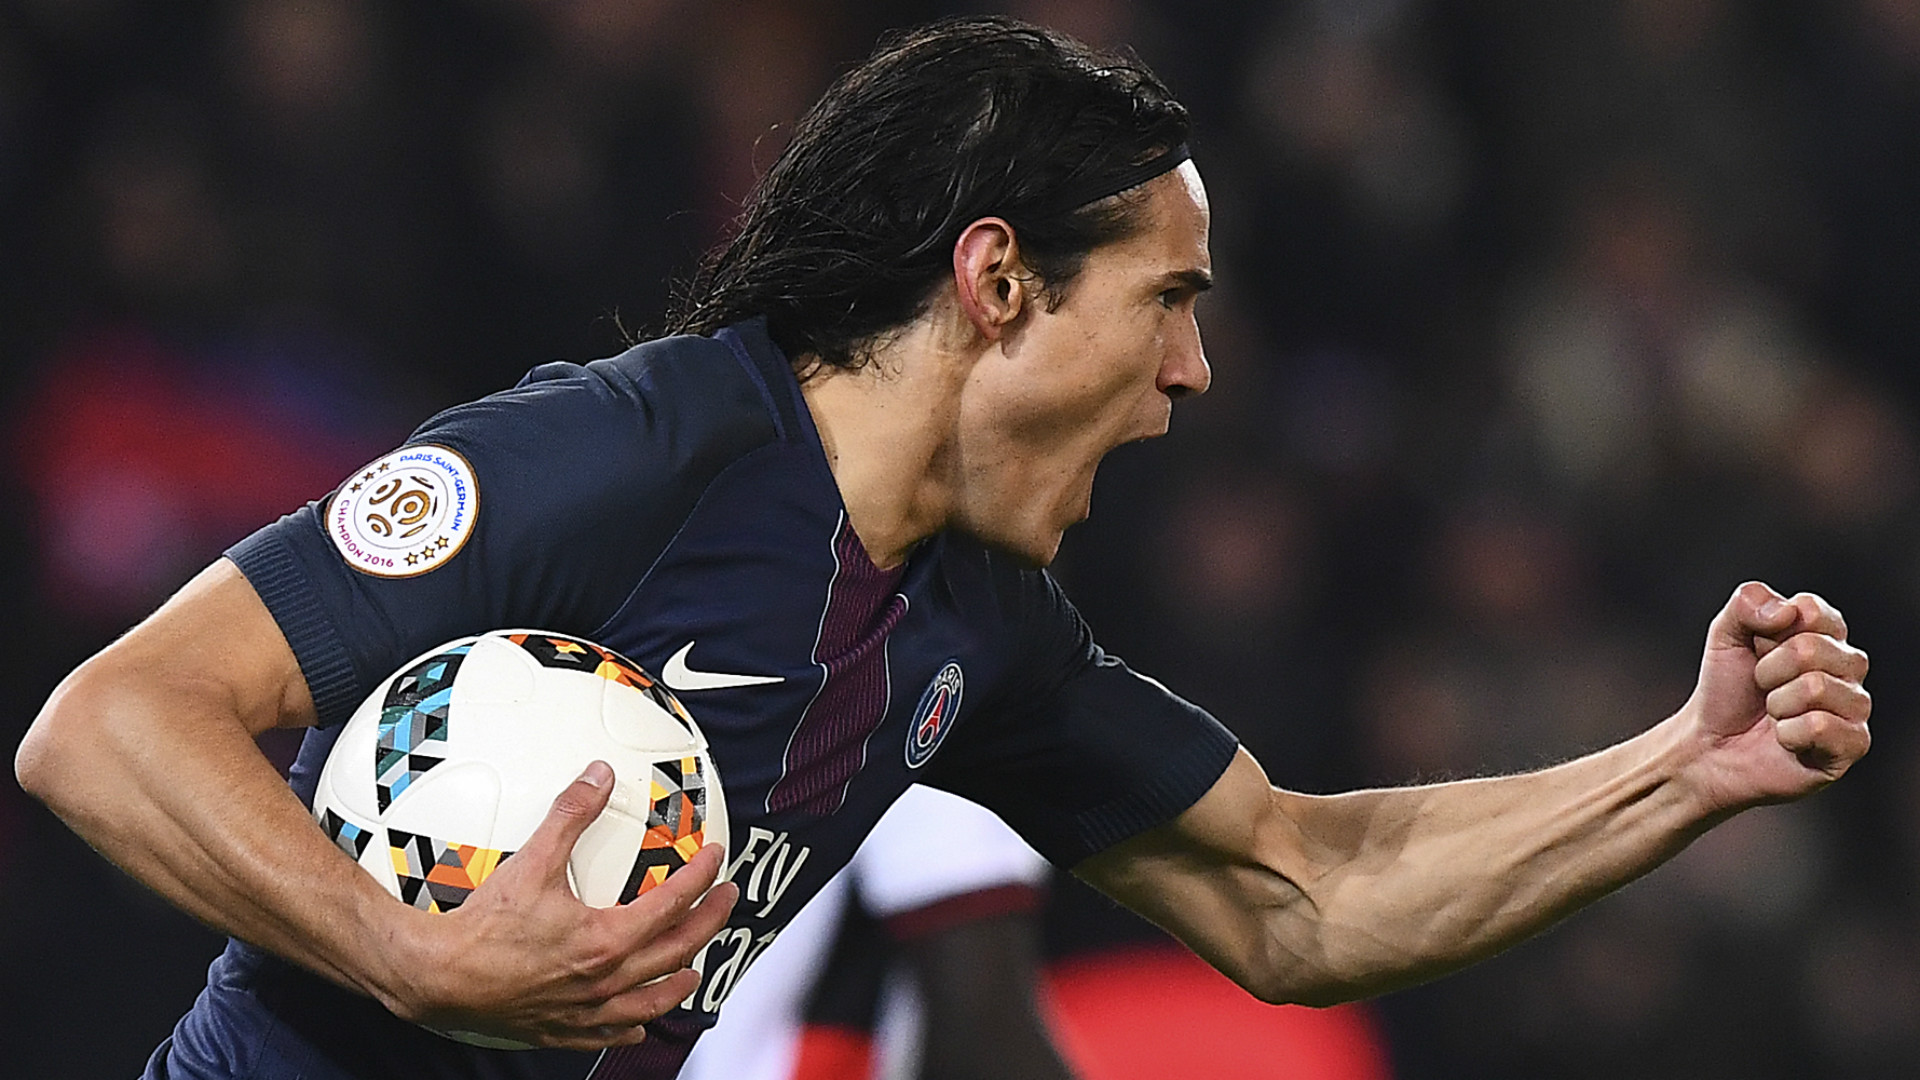 Cavani on Suarez: We come from the same place, but we're different